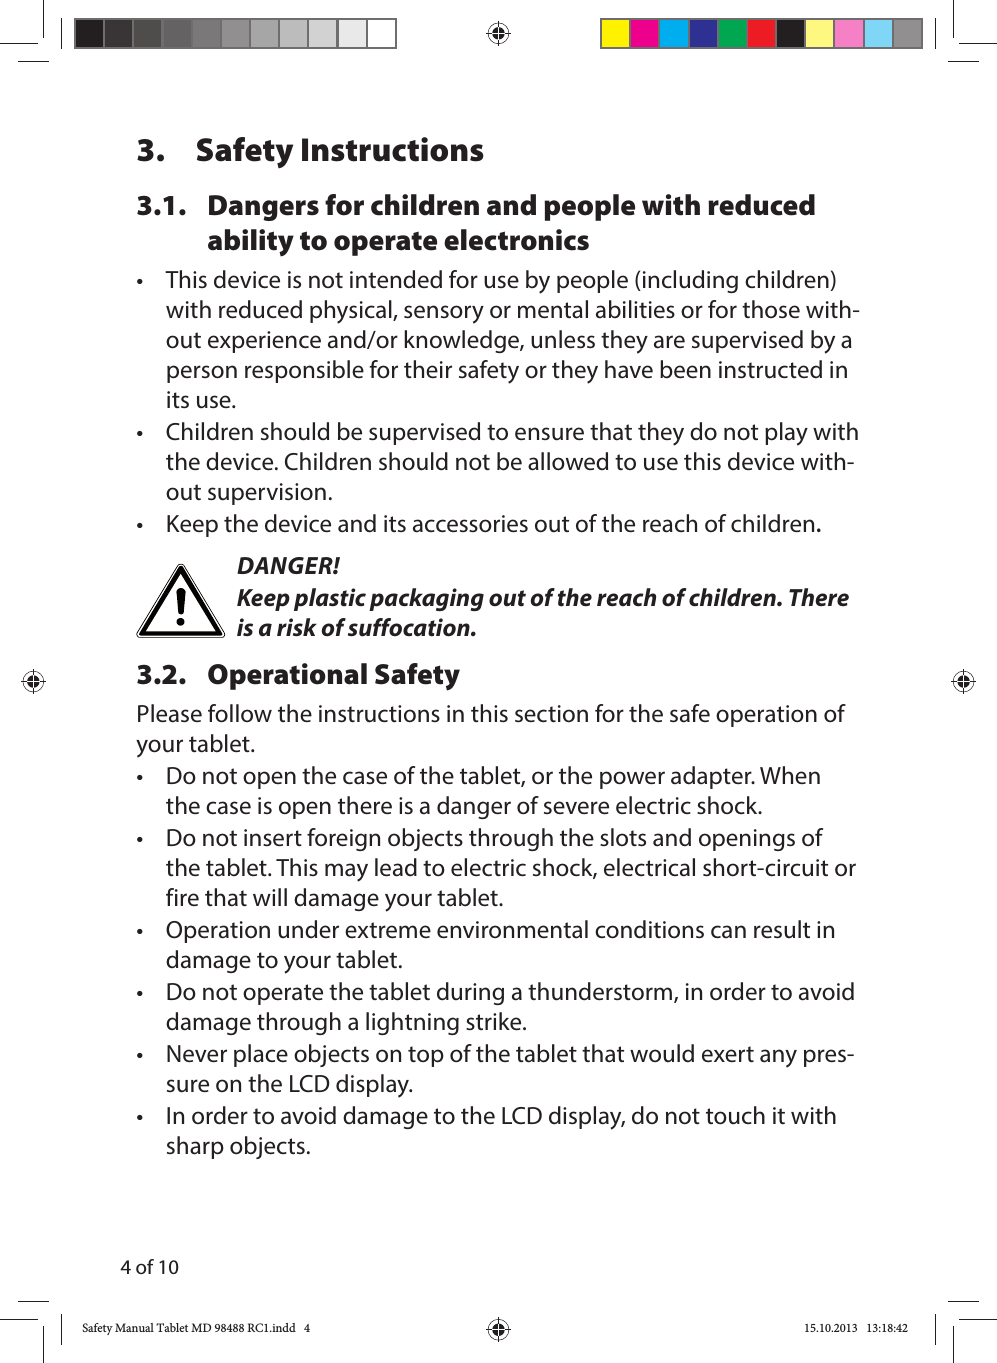 4 of 103. Safety Instructions3.1.  Dangers for children and people with reduced ability to operate electronics•  This device is not intended for use by people (including children) with reduced physical, sensory or mental abilities or for those with-out experience and/or knowledge, unless they are supervised by a person responsible for their safety or they have been instructed in its use.•  Children should be supervised to ensure that they do not play with the device. Children should not be allowed to use this device with-out supervision.•  Keep the device and its accessories out of the reach of children.DANGER!Keep plastic packaging out of the reach of children. There is a risk of suffocation.3.2. Operational SafetyPlease follow the instructions in this section for the safe operation of your tablet. •  Do not open the case of the tablet, or the power adapter. When the case is open there is a danger of severe electric shock.•  Do not insert foreign objects through the slots and openings of the tablet. This may lead to electric shock, electrical short-circuit or fire that will damage your tablet.•  Operation under extreme environmental conditions can result in damage to your tablet.•  Do not operate the tablet during a thunderstorm, in order to avoid damage through a lightning strike.•  Never place objects on top of the tablet that would exert any pres-sure on the LCD display.•  In order to avoid damage to the LCD display, do not touch it with sharp objects.Safety Manual Tablet MD 98488 RC1.indd   4Safety Manual Tablet MD 98488 RC1.indd   4 15.10.2013   13:18:4215.10.2013   13:18:42